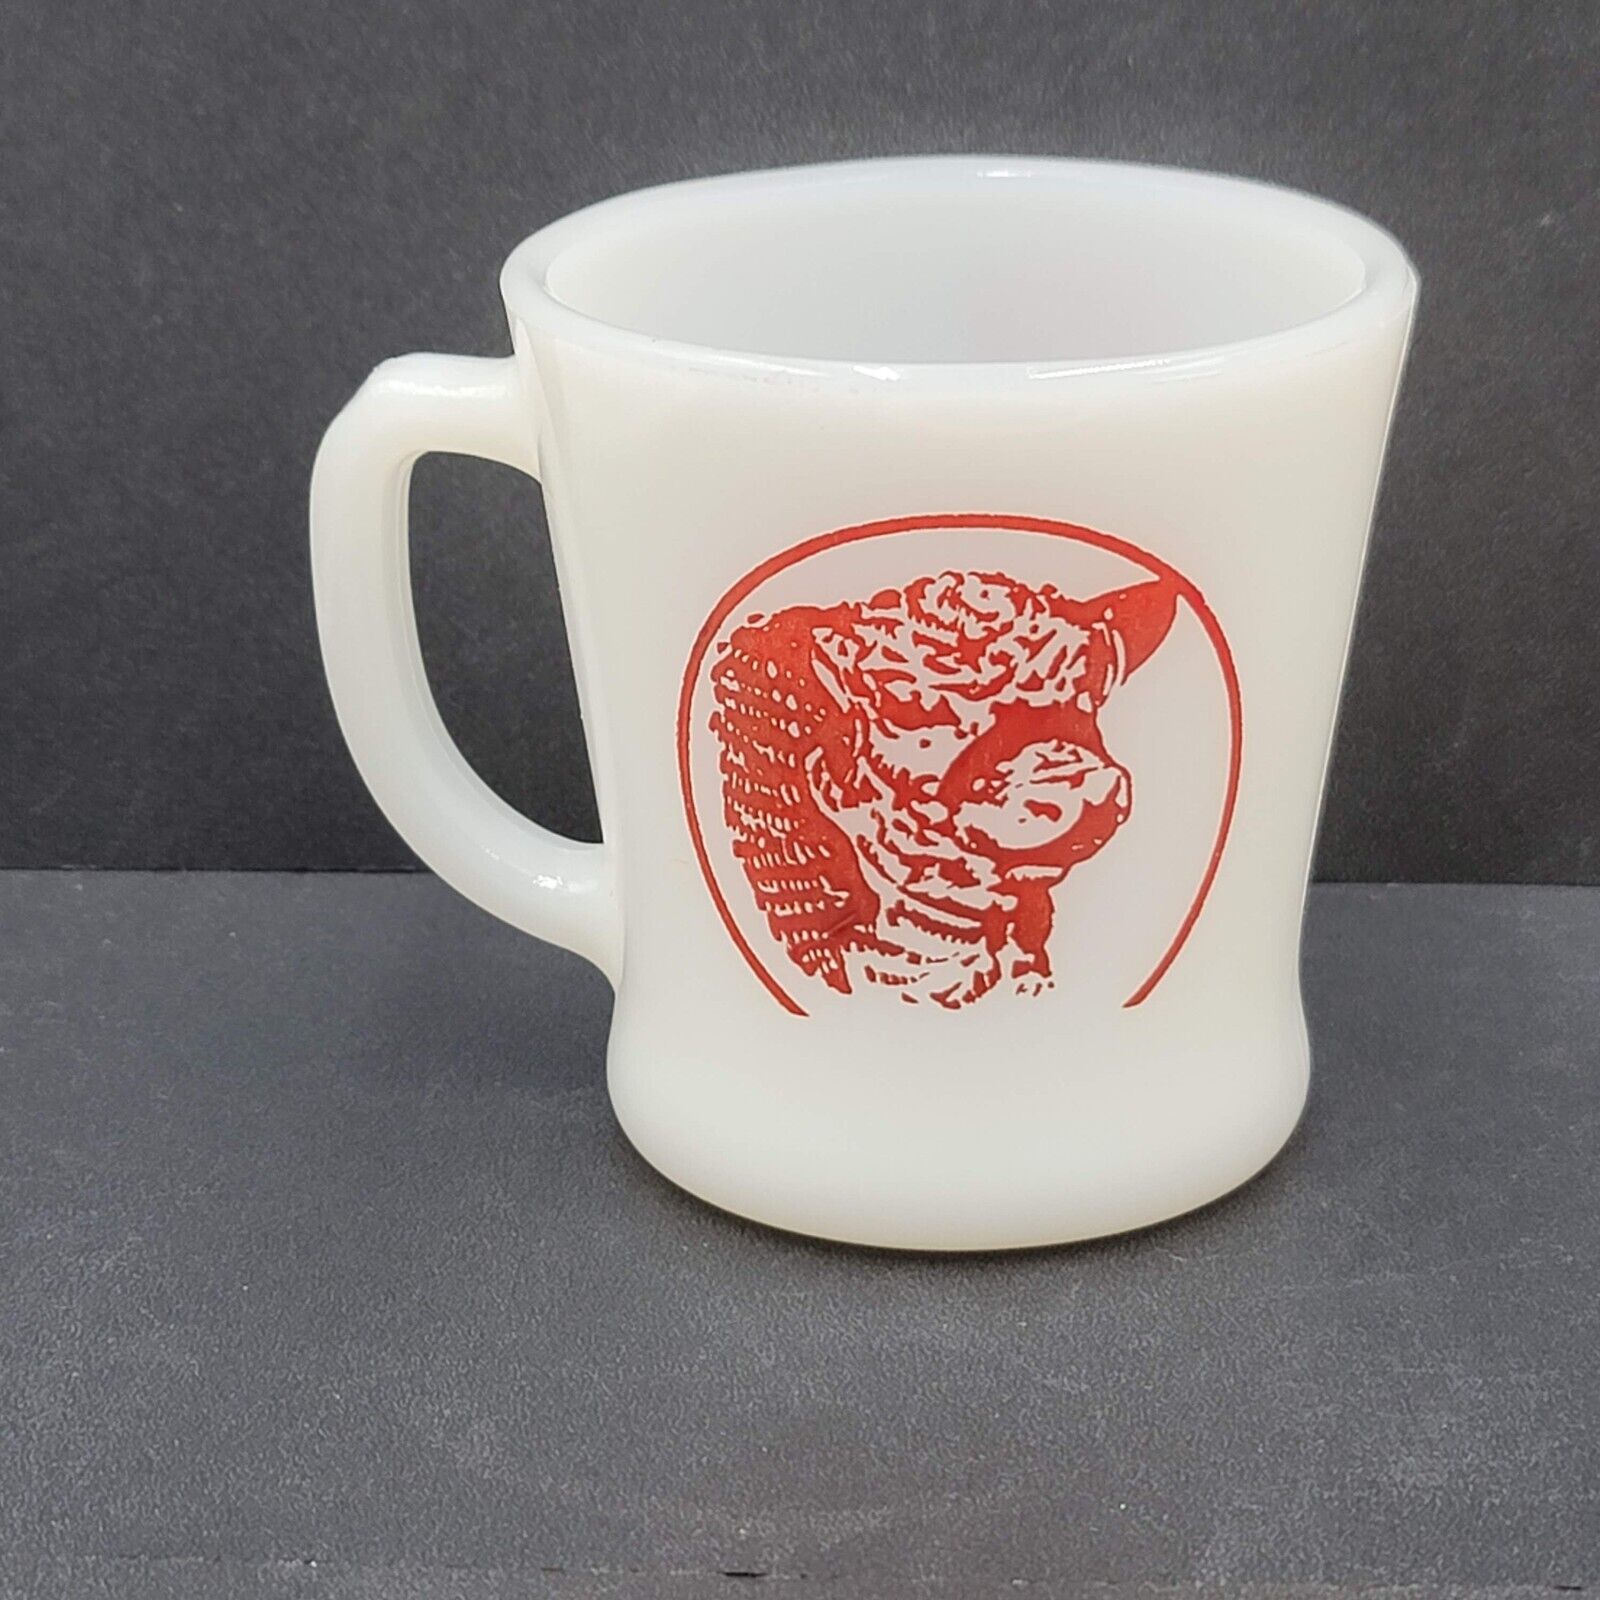 Vintage Sizzler Steakhouse Fire King Coffee Mug Cup White Red RARE